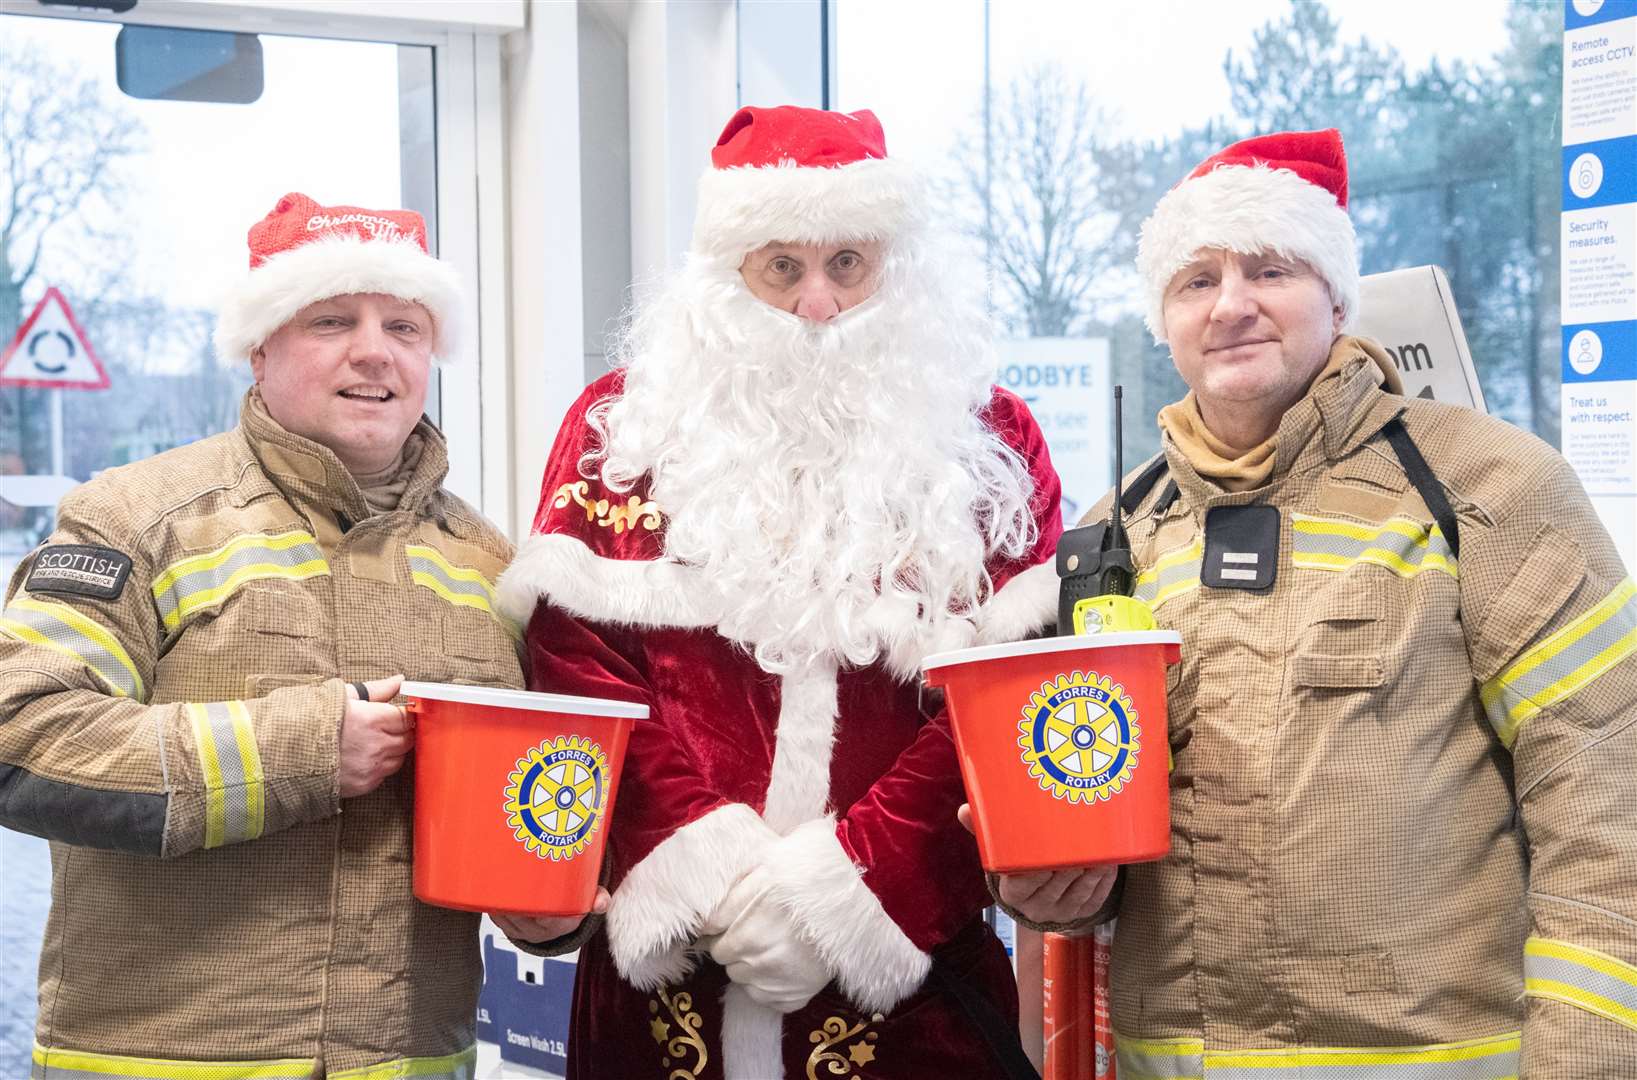 Forres firefighters Stewart Fraser (left) and David Raeburn (right) join Santa at the Forres Tesco.